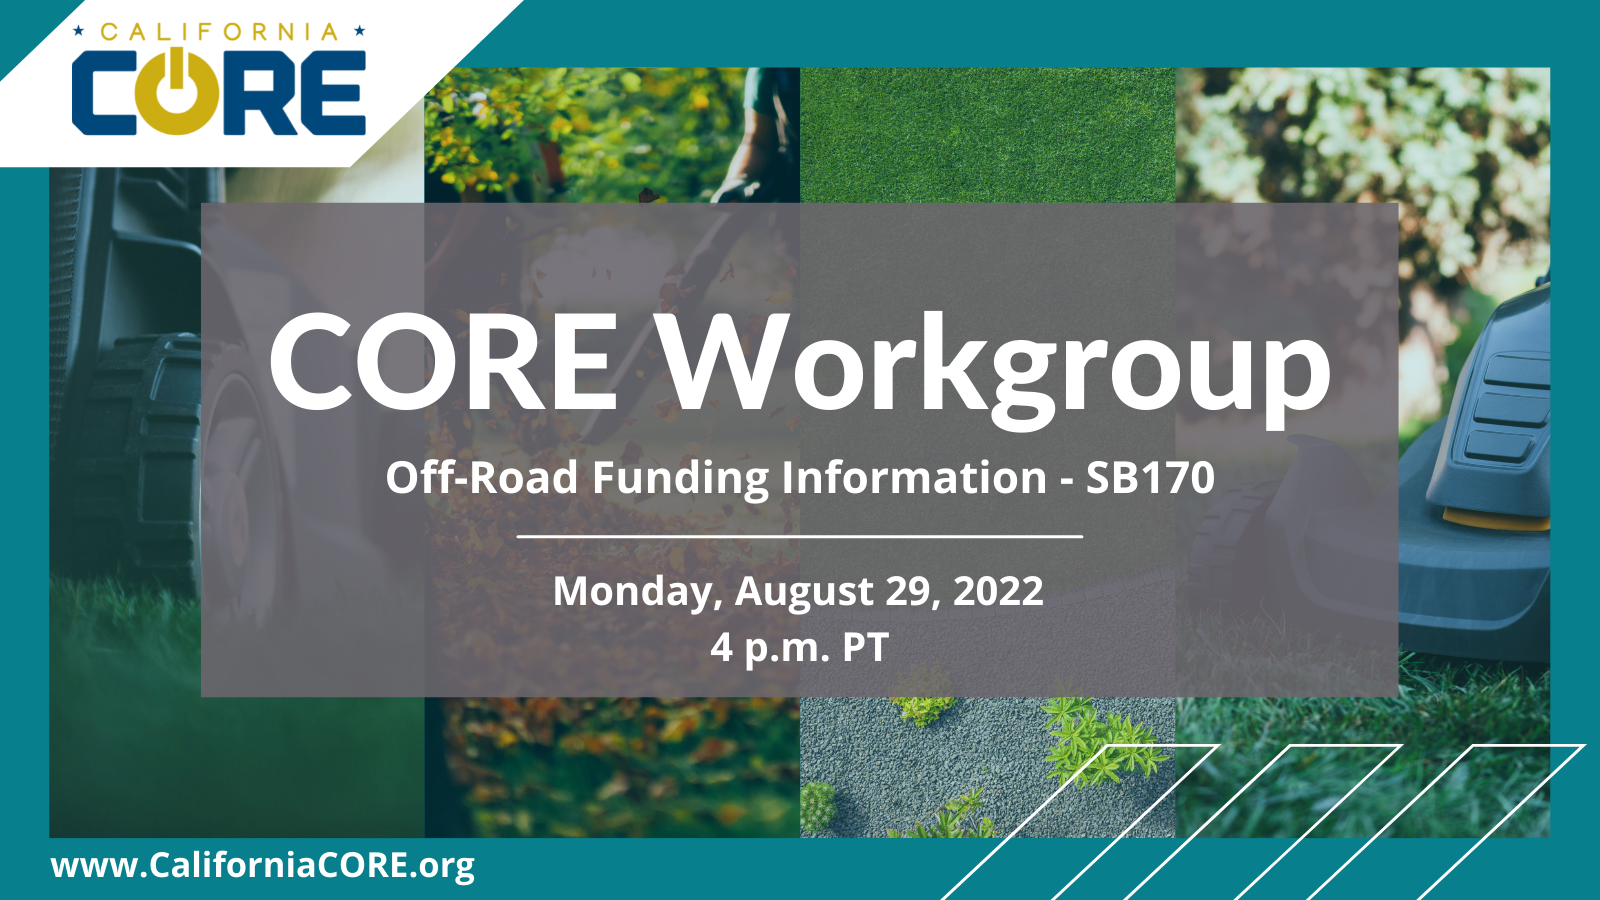 CORE Workgroup Flyer 8.29.2022